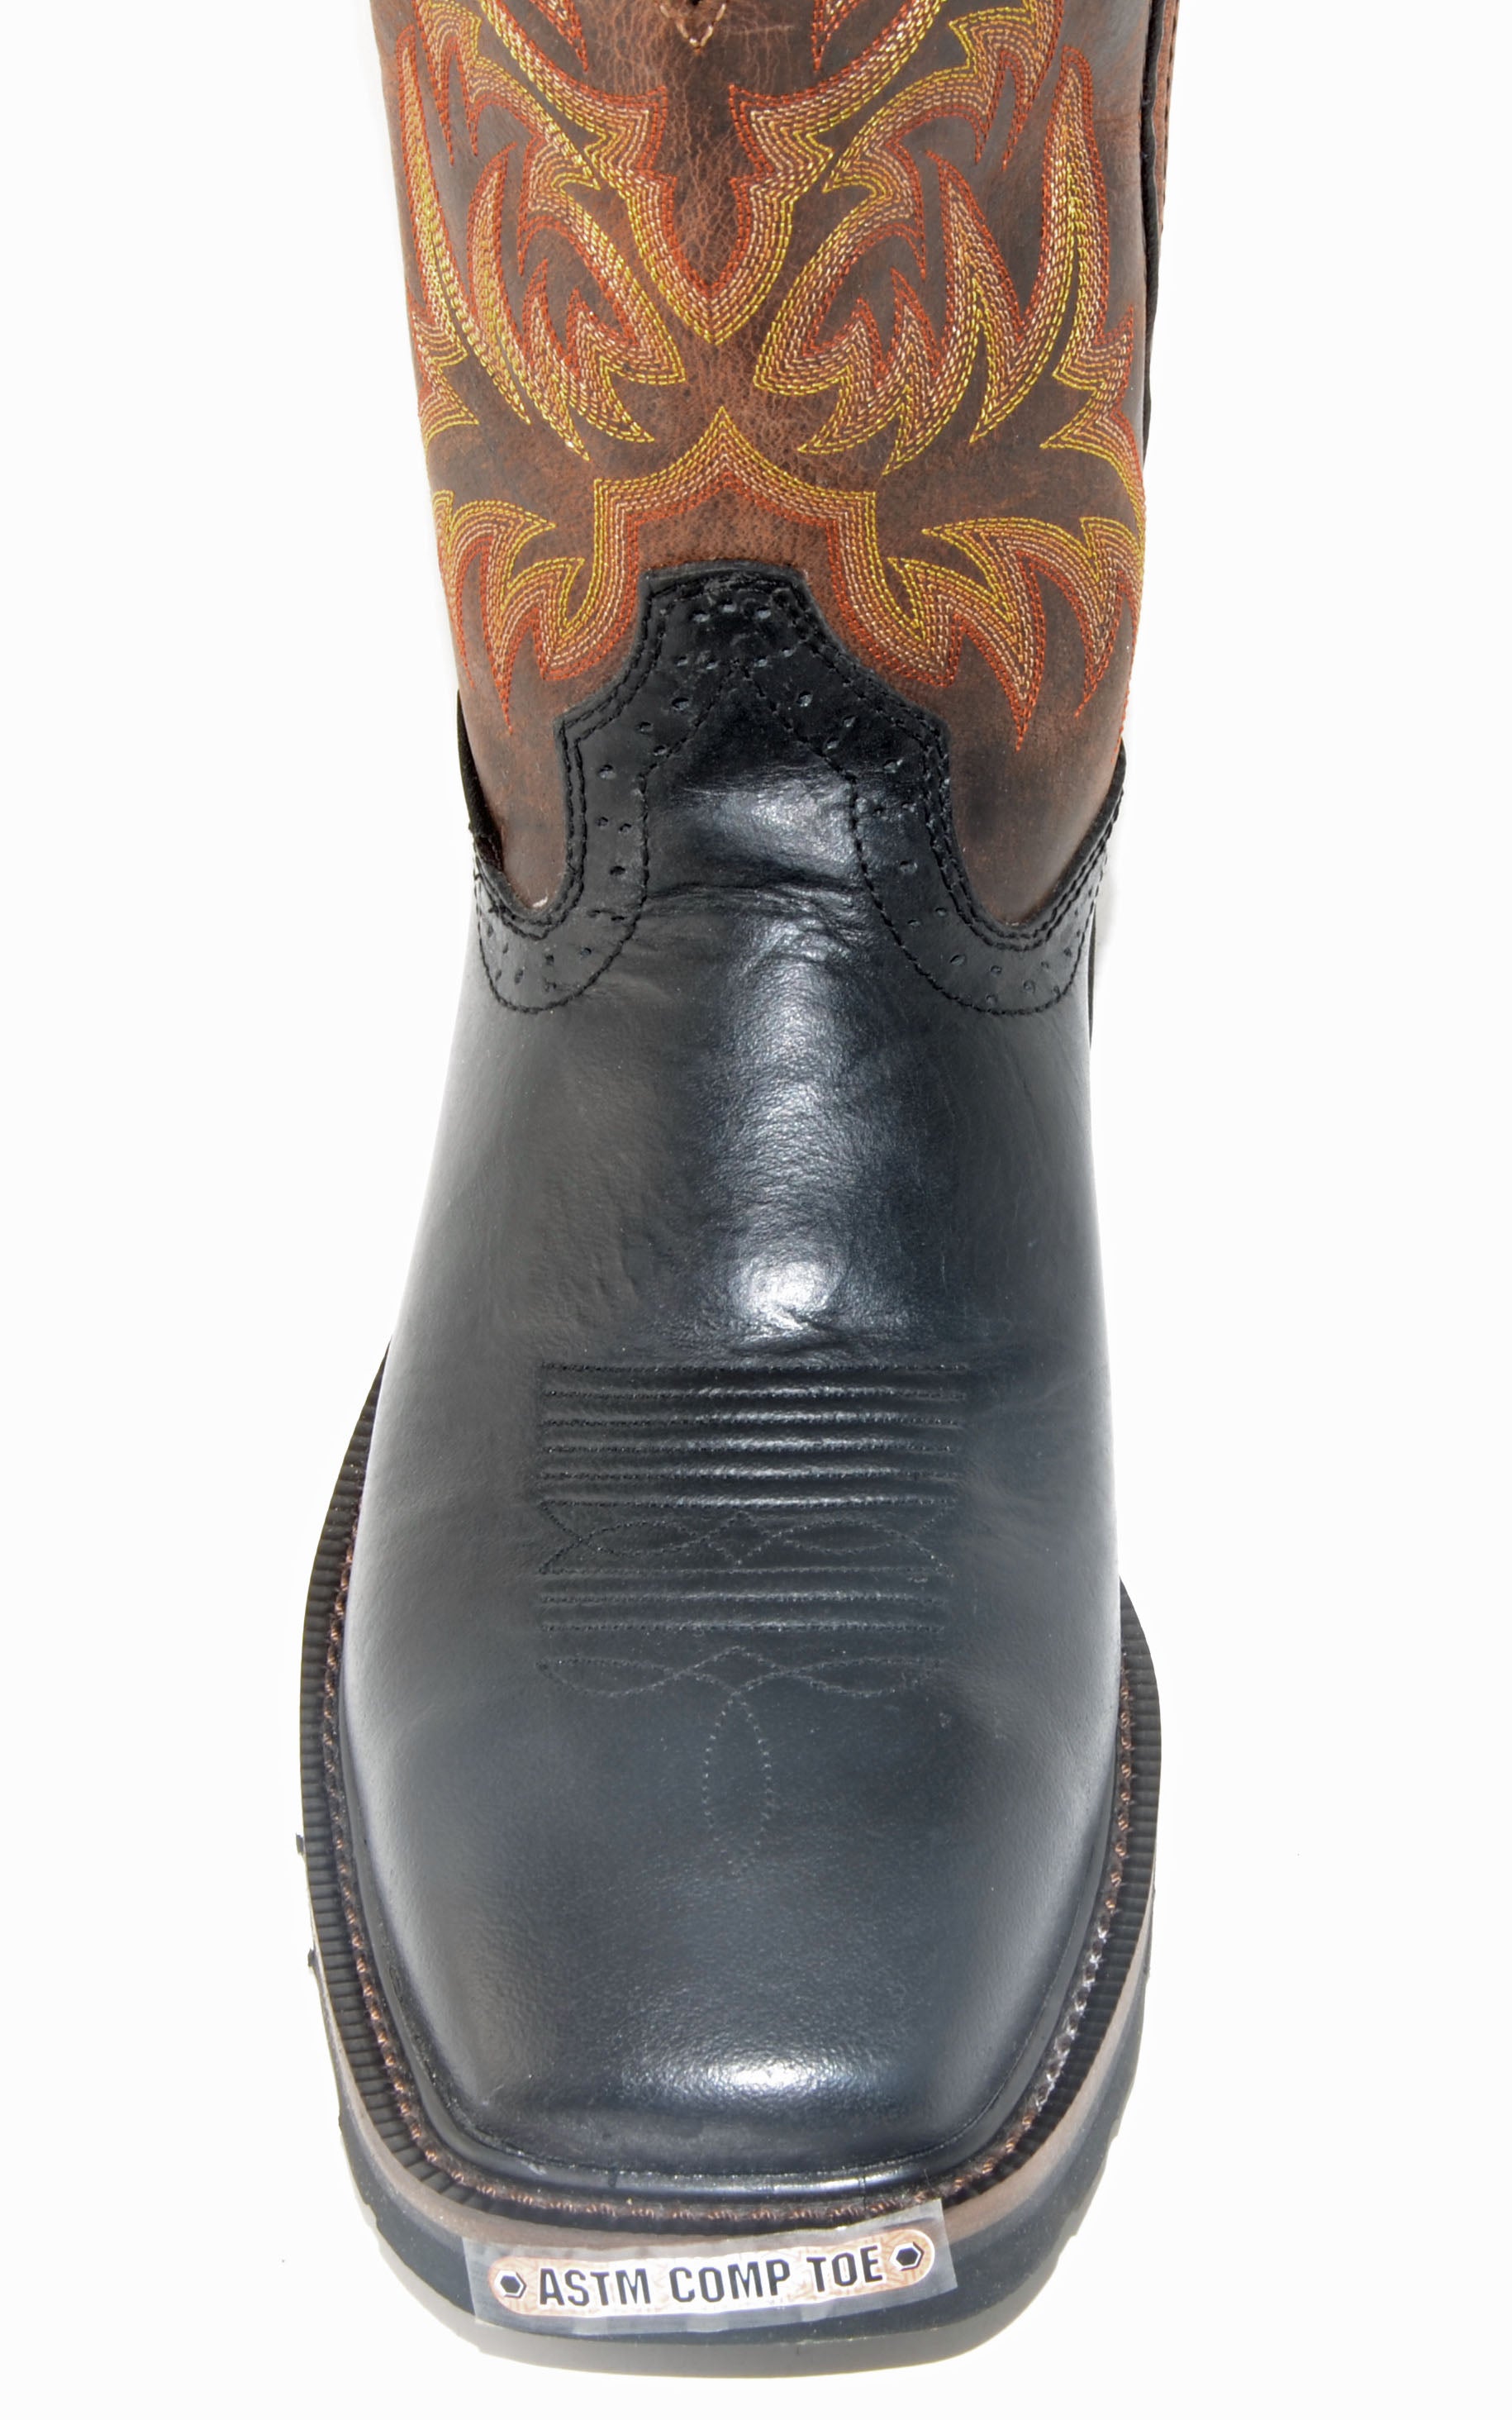 justin boots composite toe